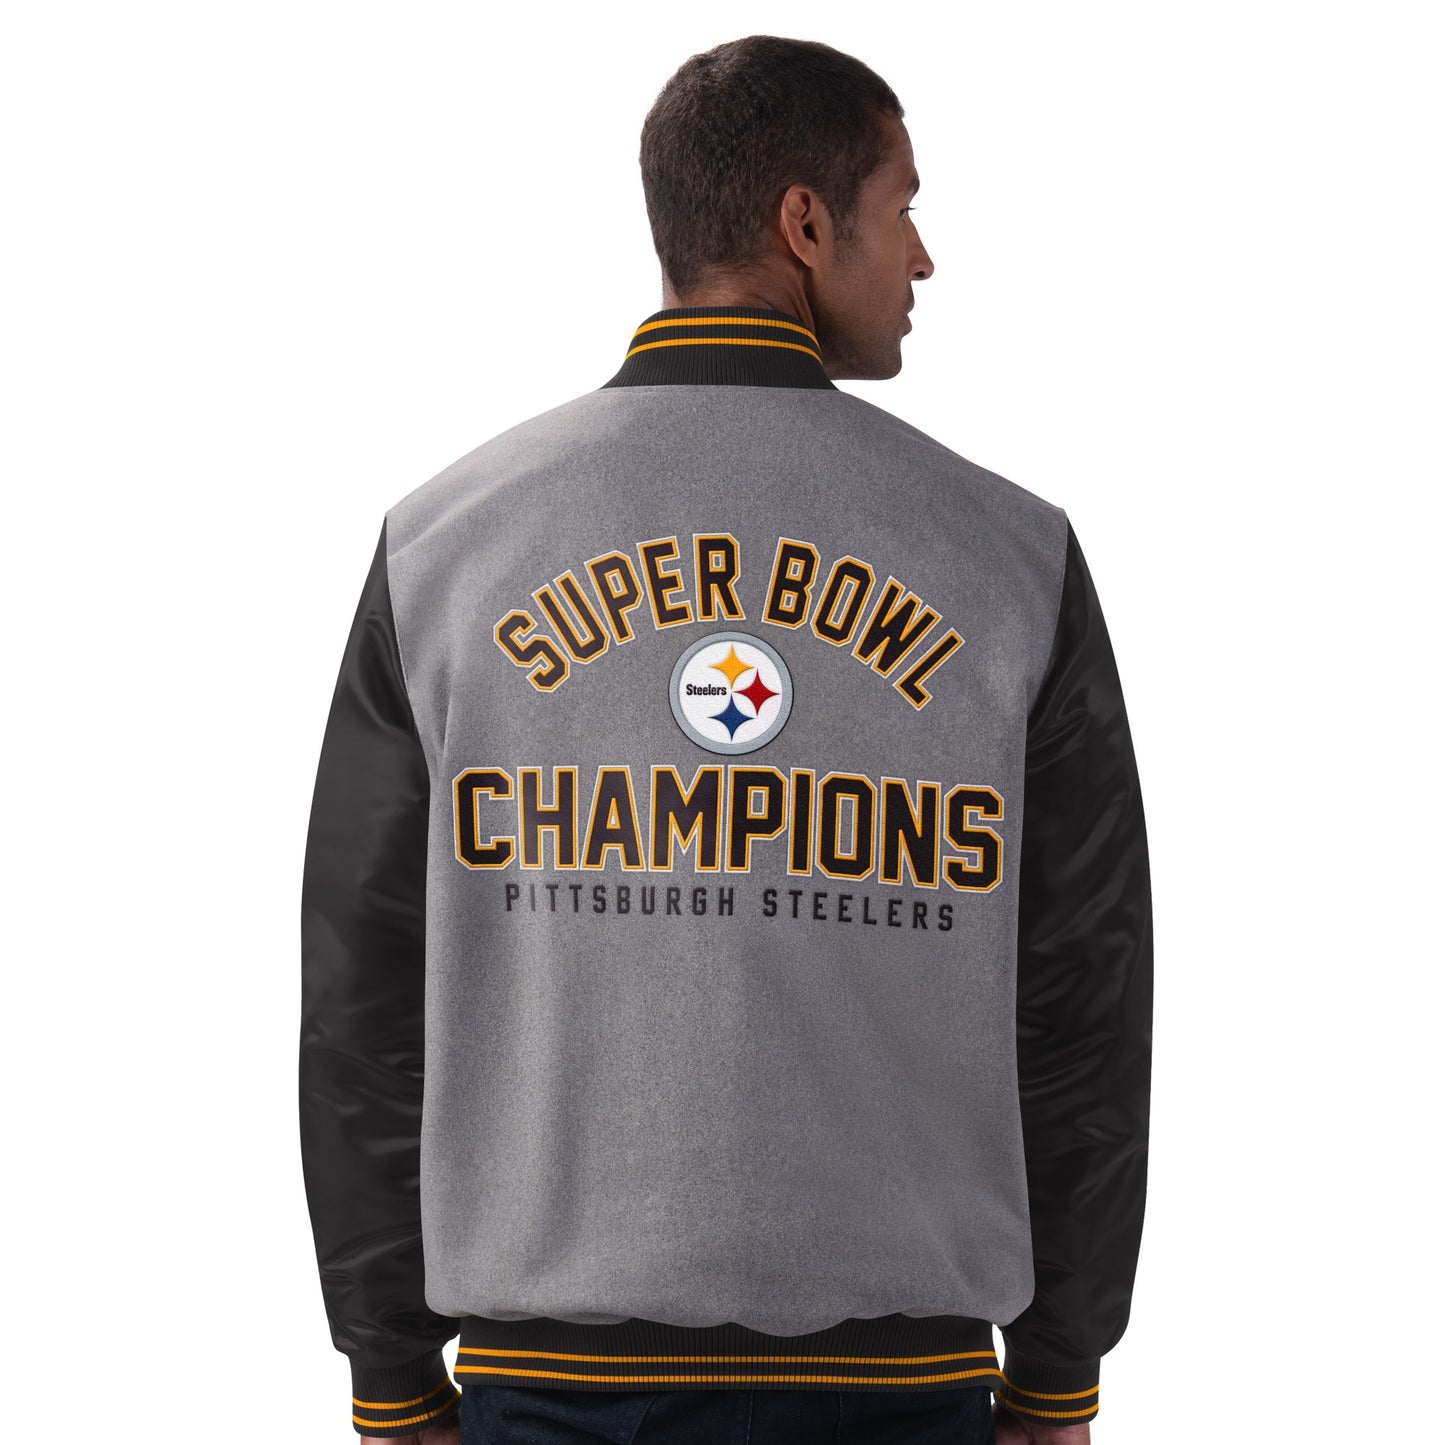 Pittsburgh Steelers 6 Time Super Bowl Champions BullPen Varsity Jacket By GIII - Gray